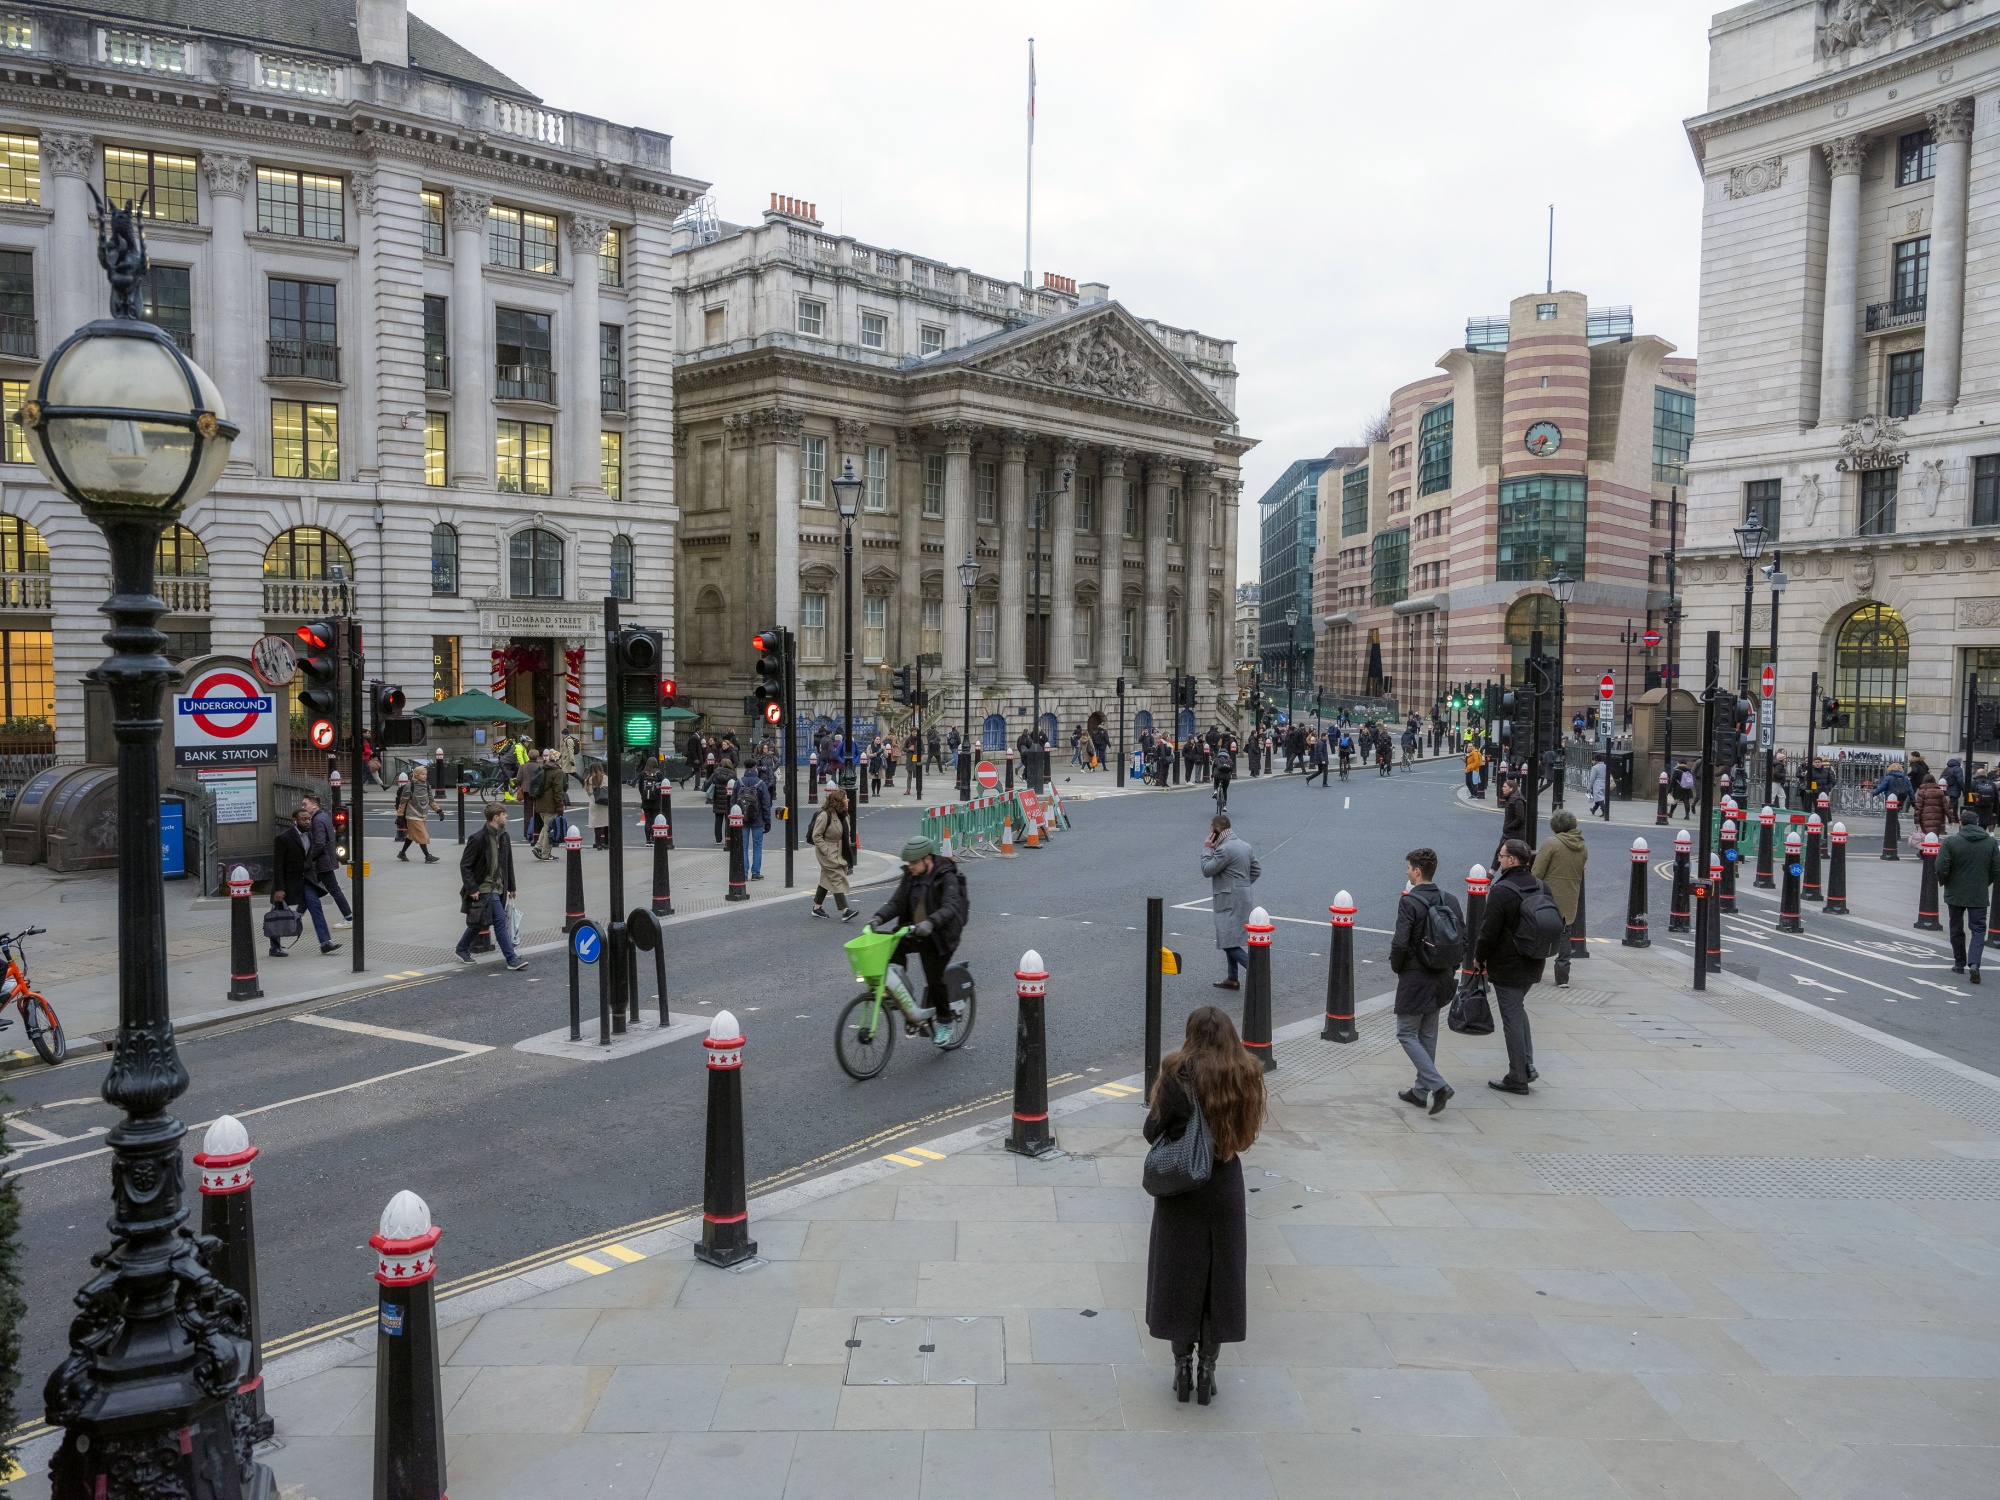 In the City of London, Radical Changes Encourage More Cyclists